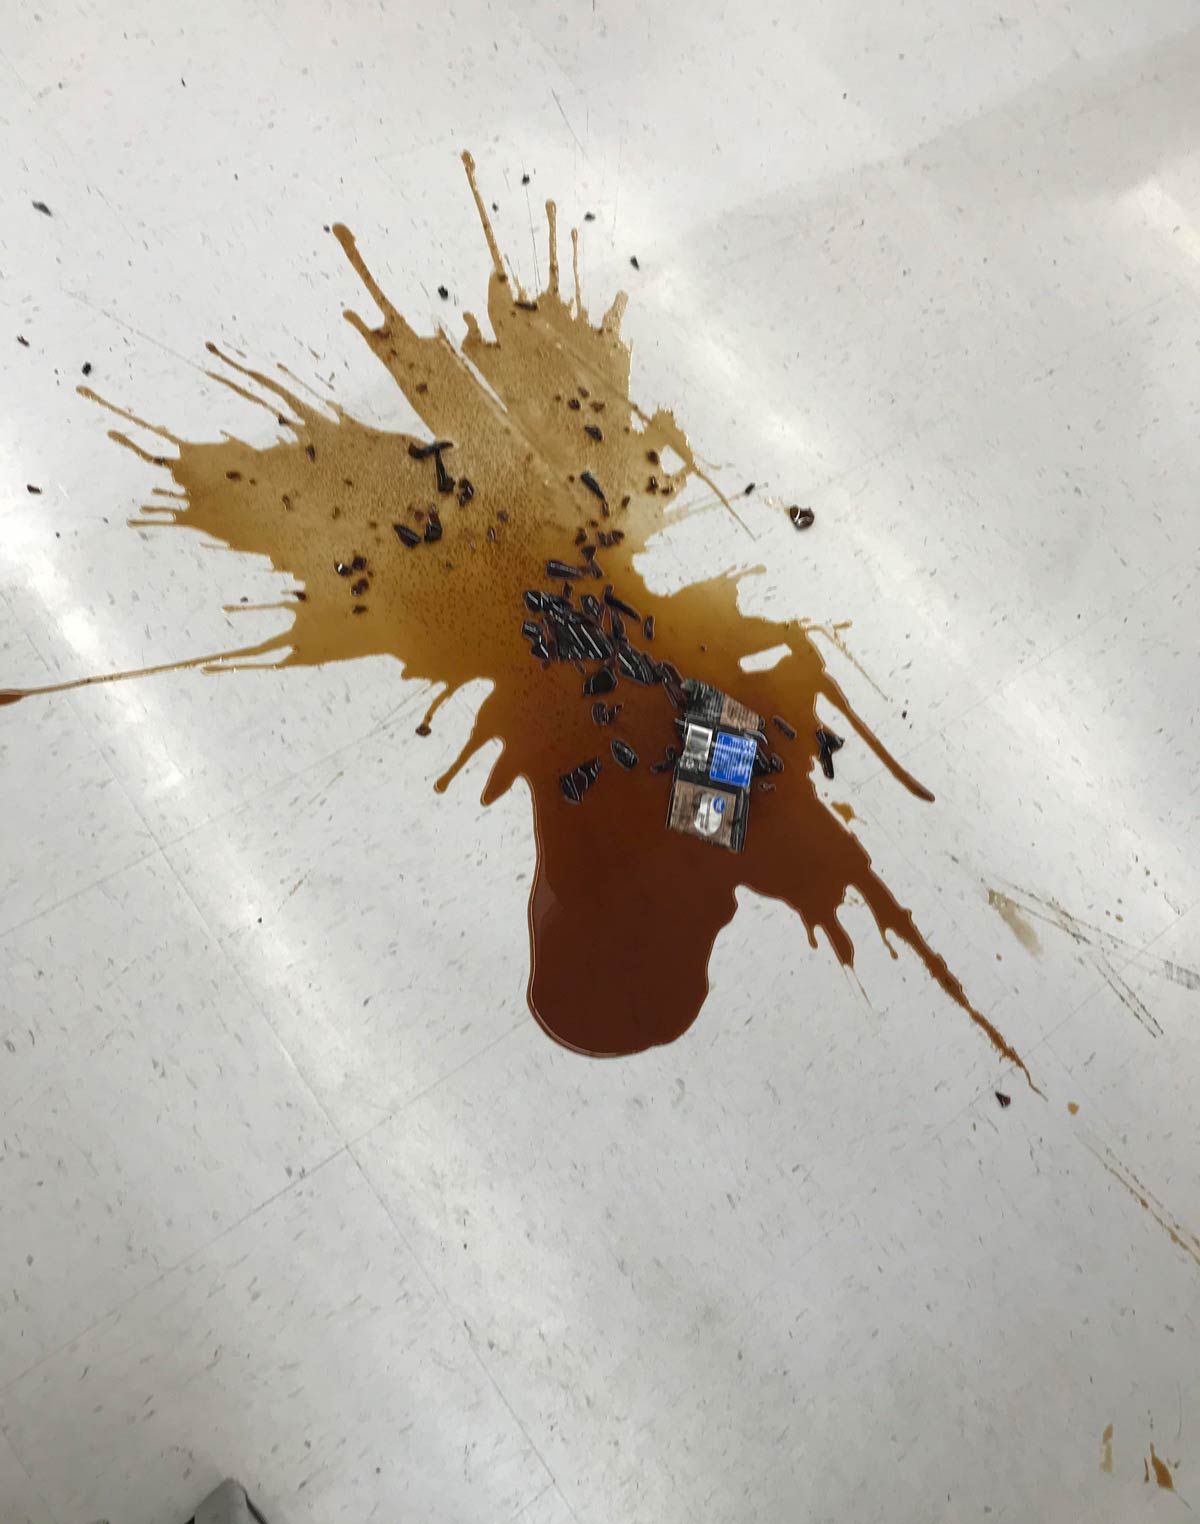 Someone dropped a pot of Worcestershire sauce at work yesterday and it looked like a moose